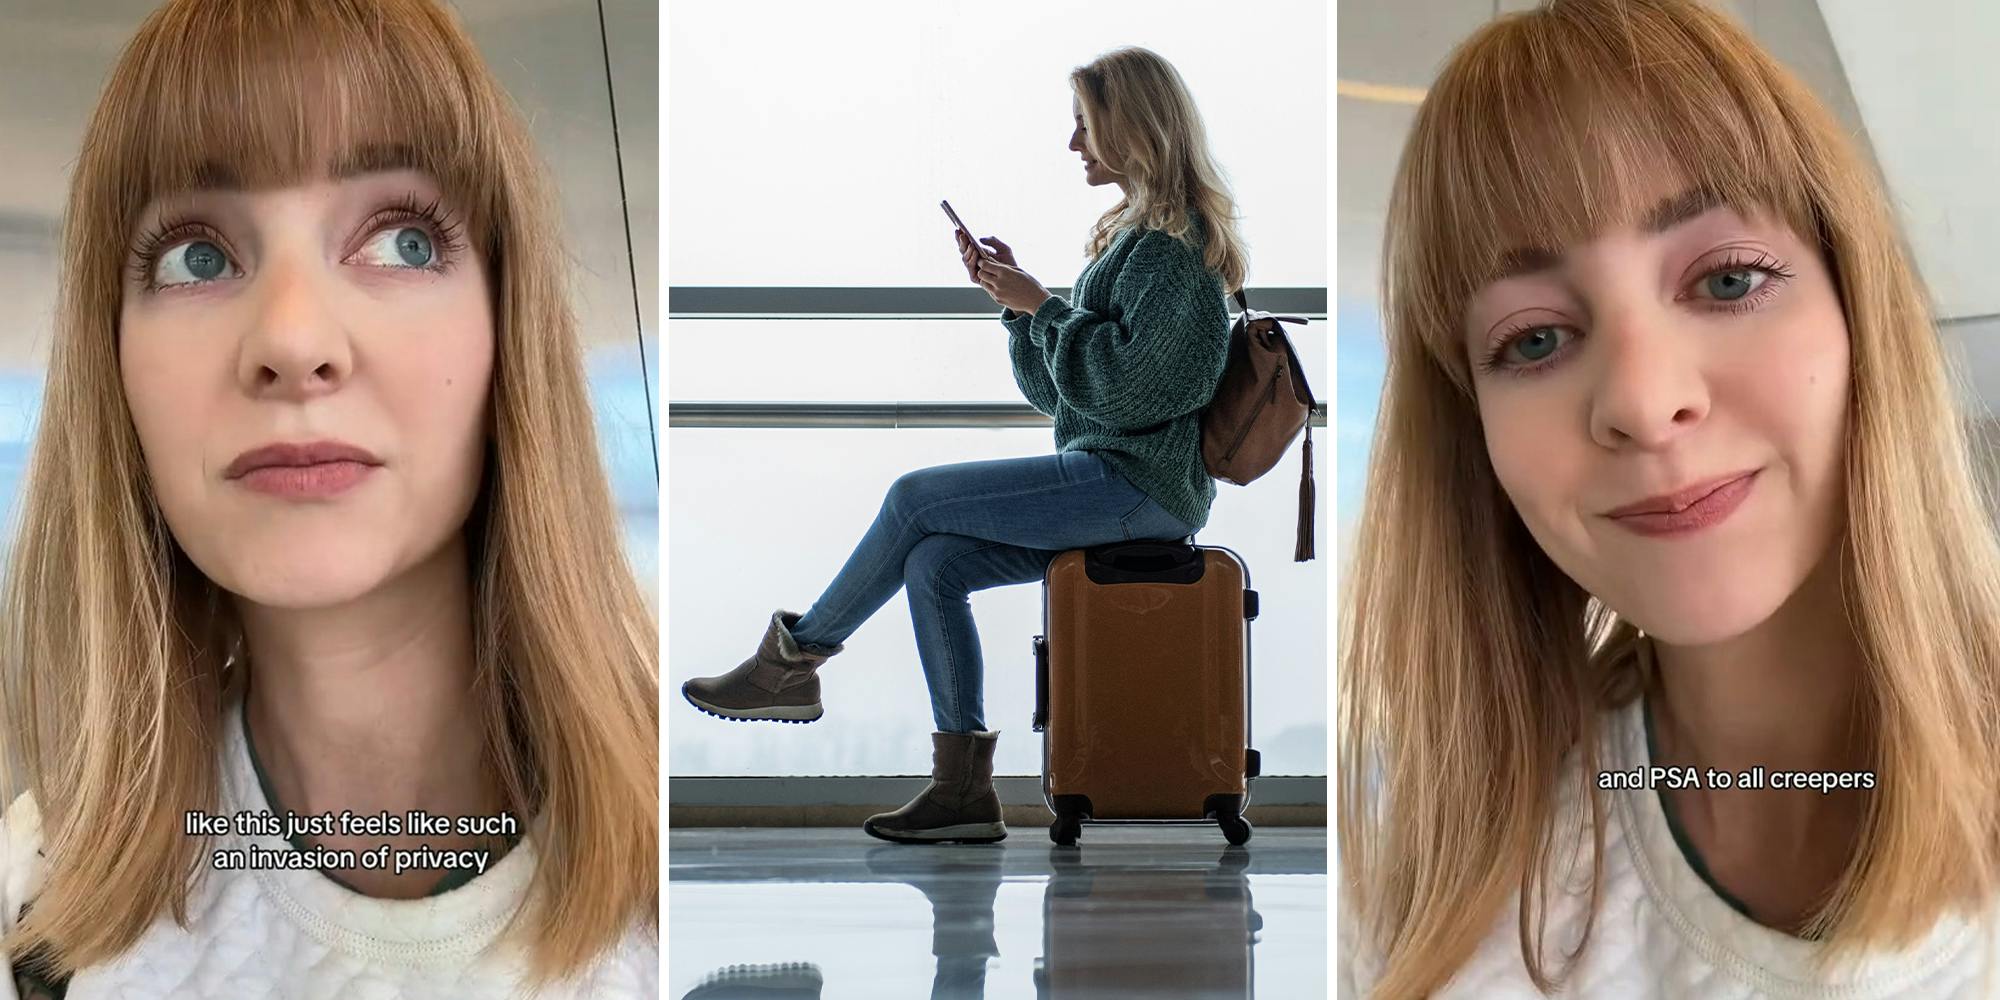 Woman receives shocking message while waiting for her flight